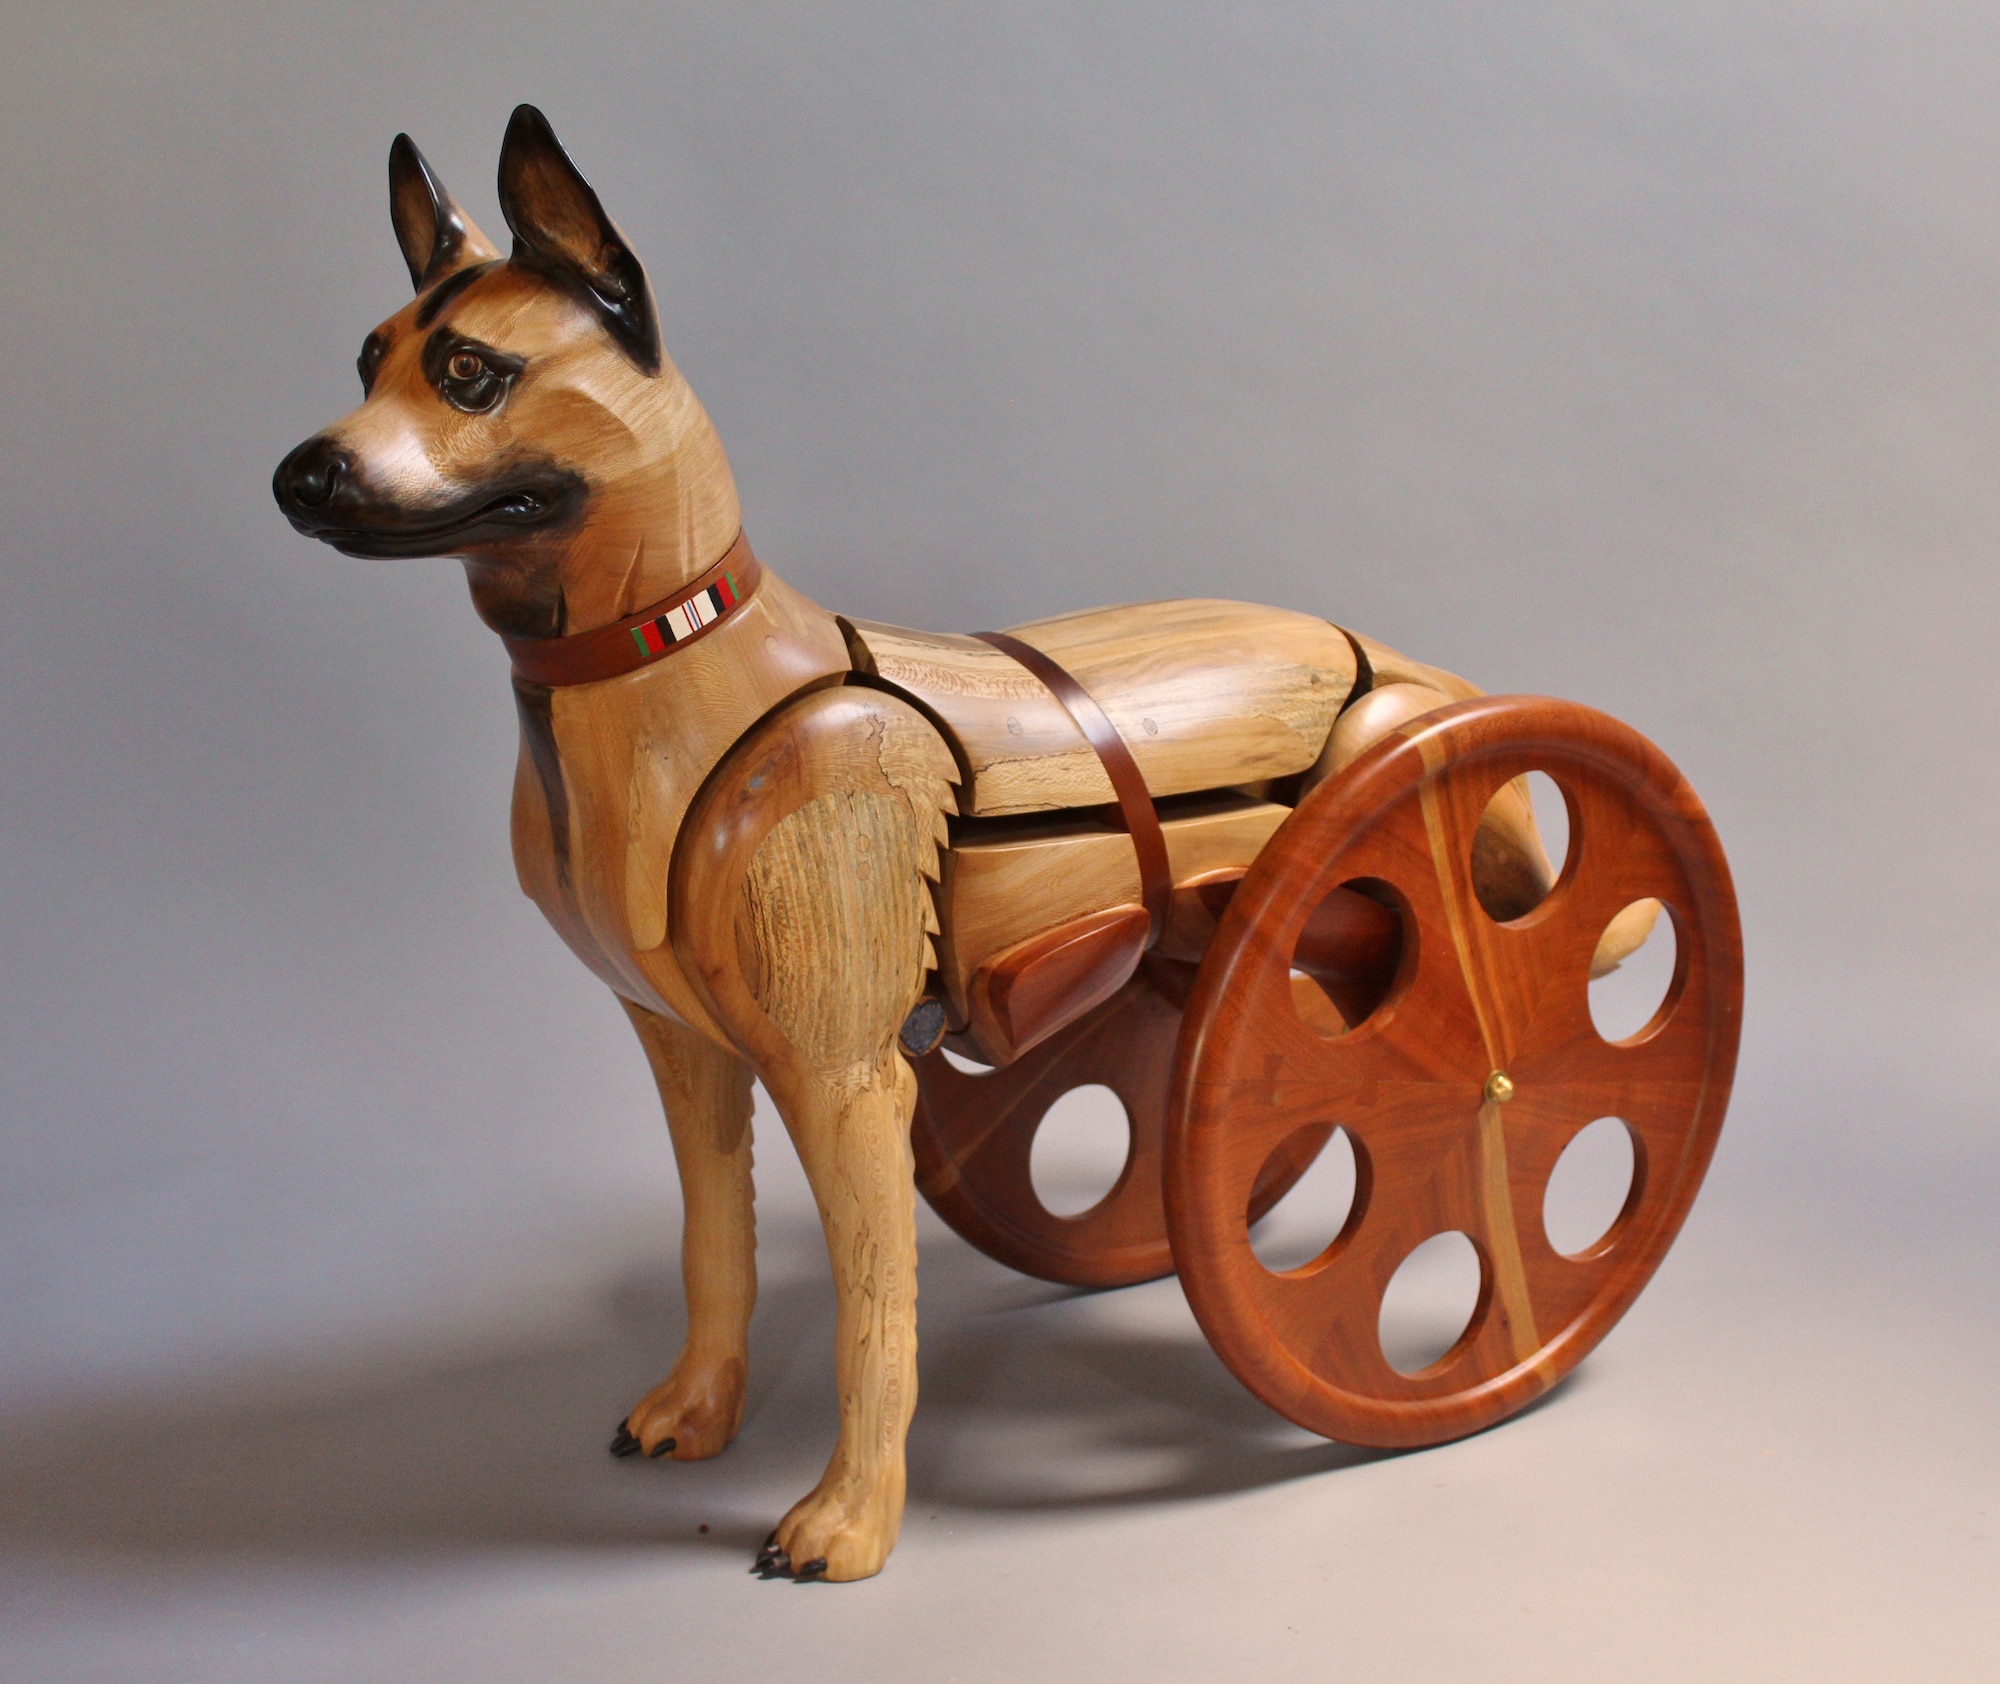 Wooden sculpture depicting a dog with its hind legs amputated and using a wheelchair.